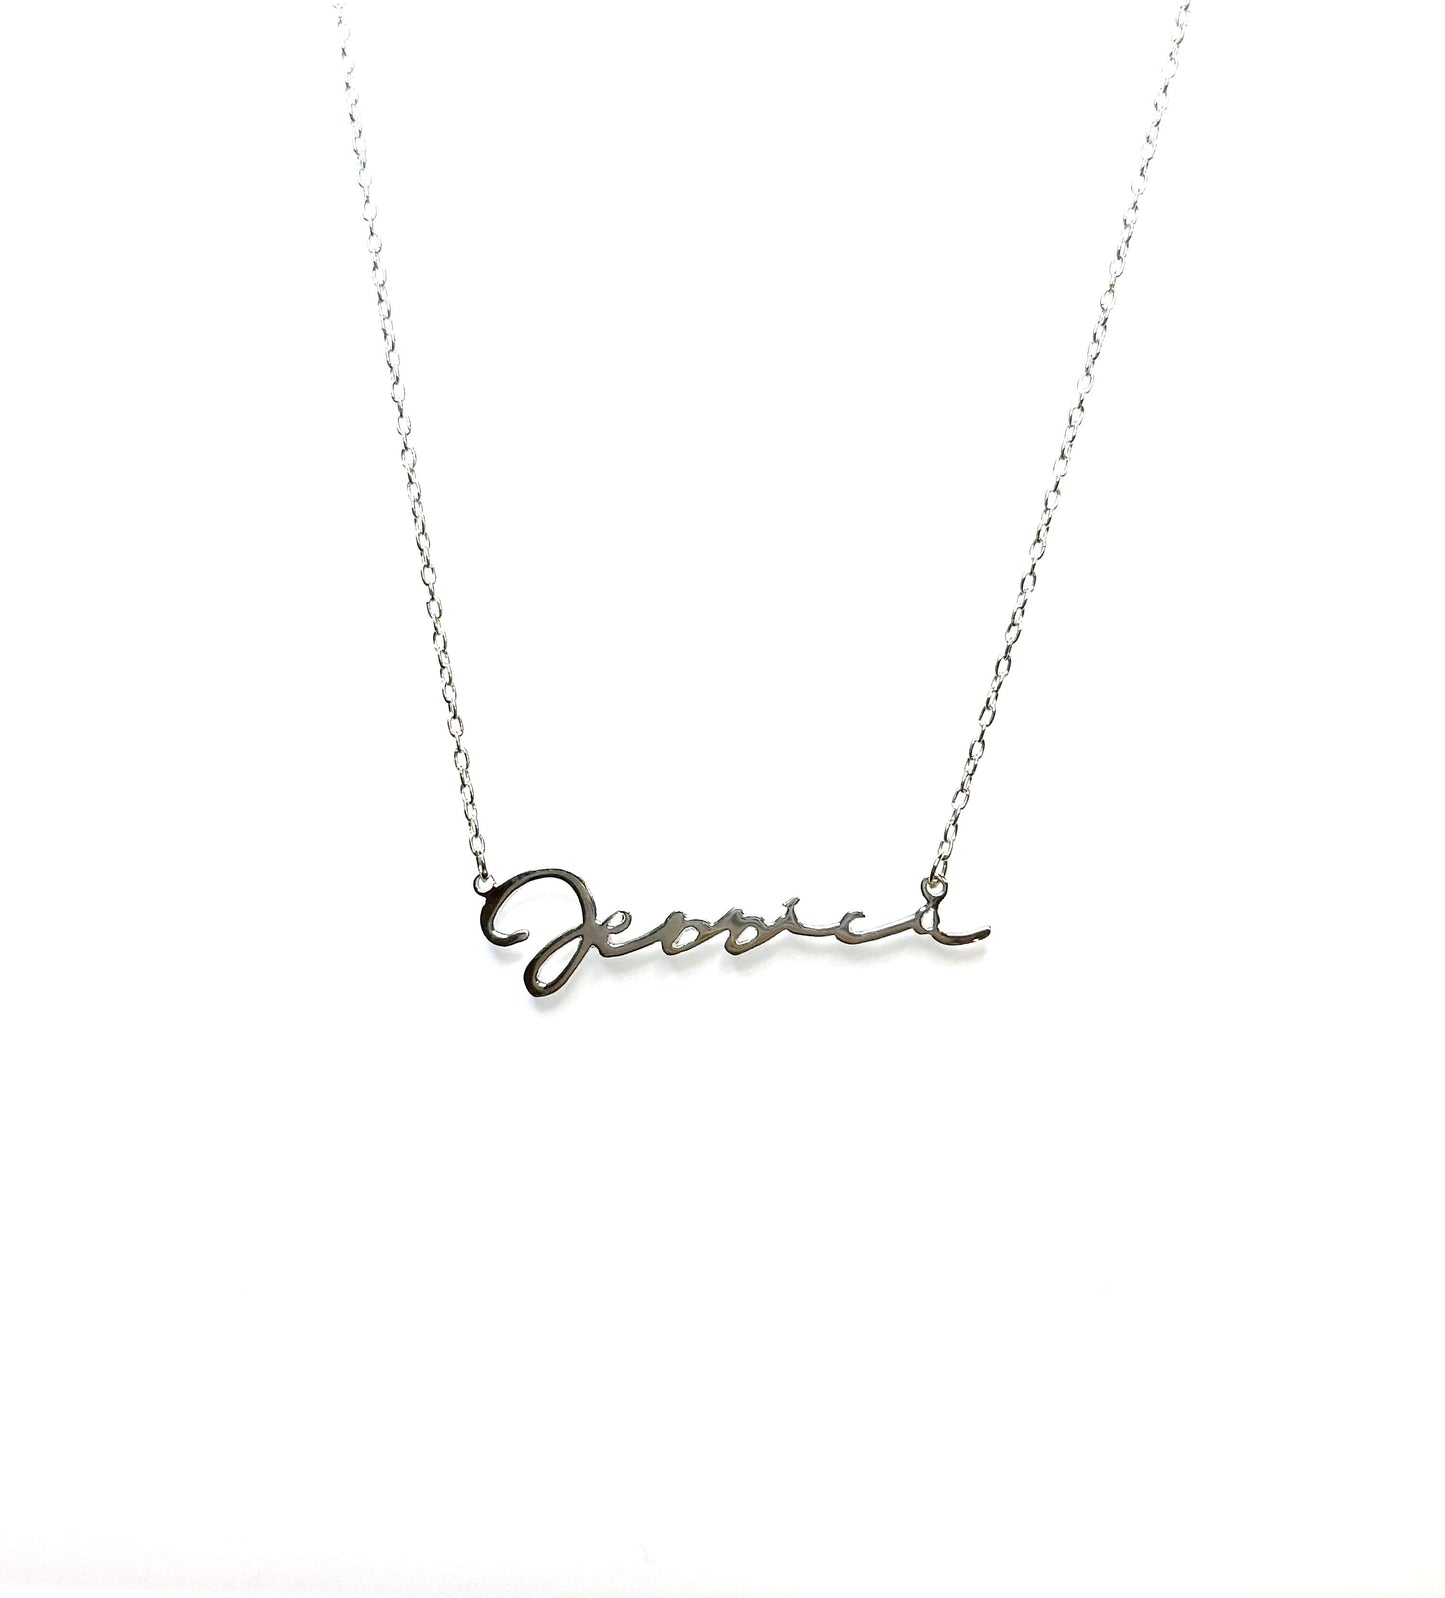 Dainty minimalist name necklace for everyday (shower safe)